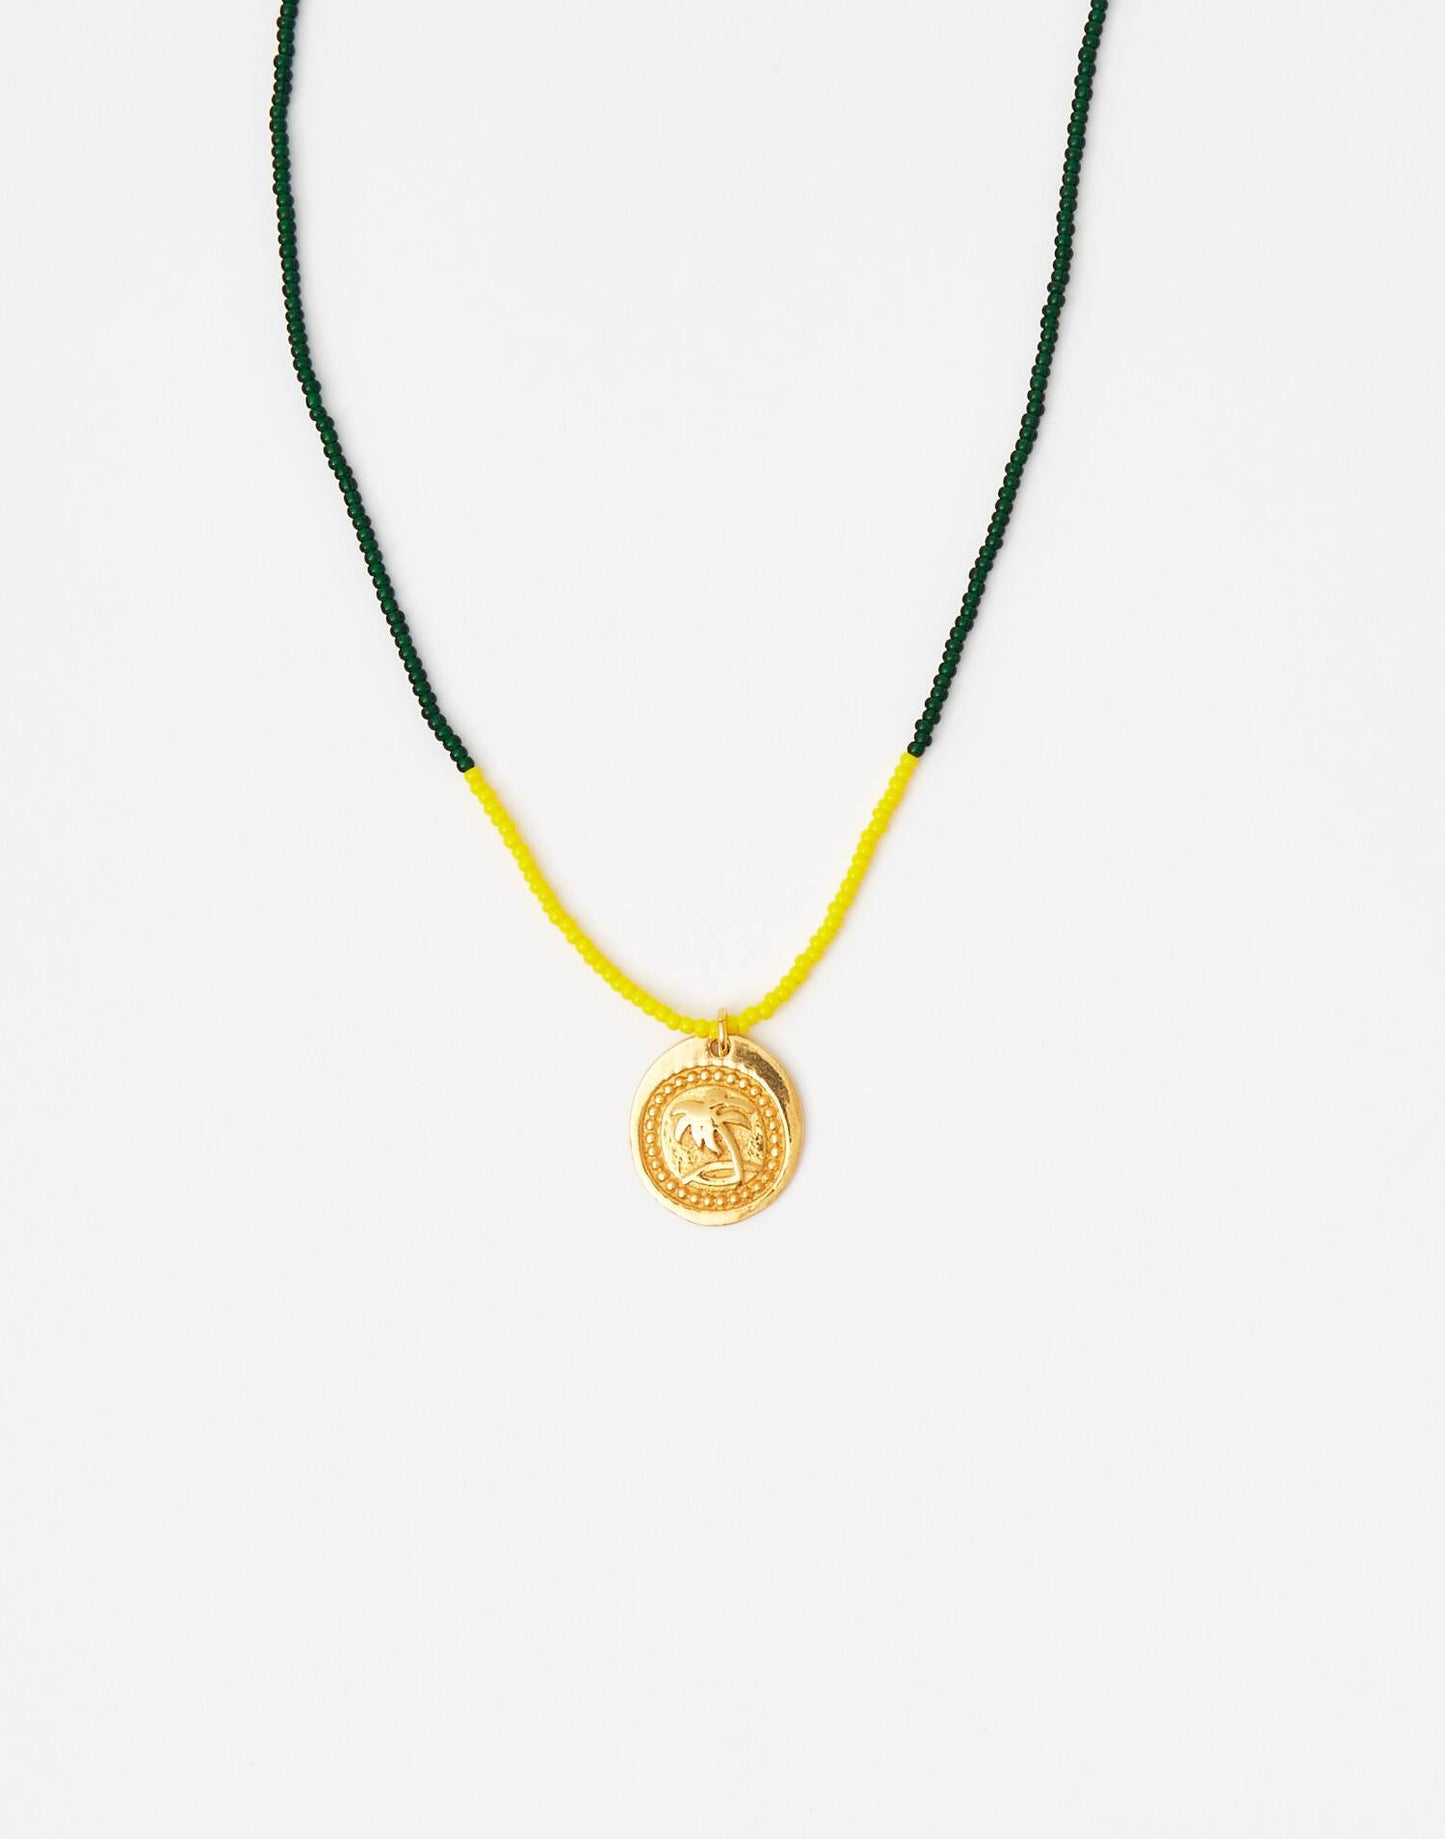 Palm tree medal necklace